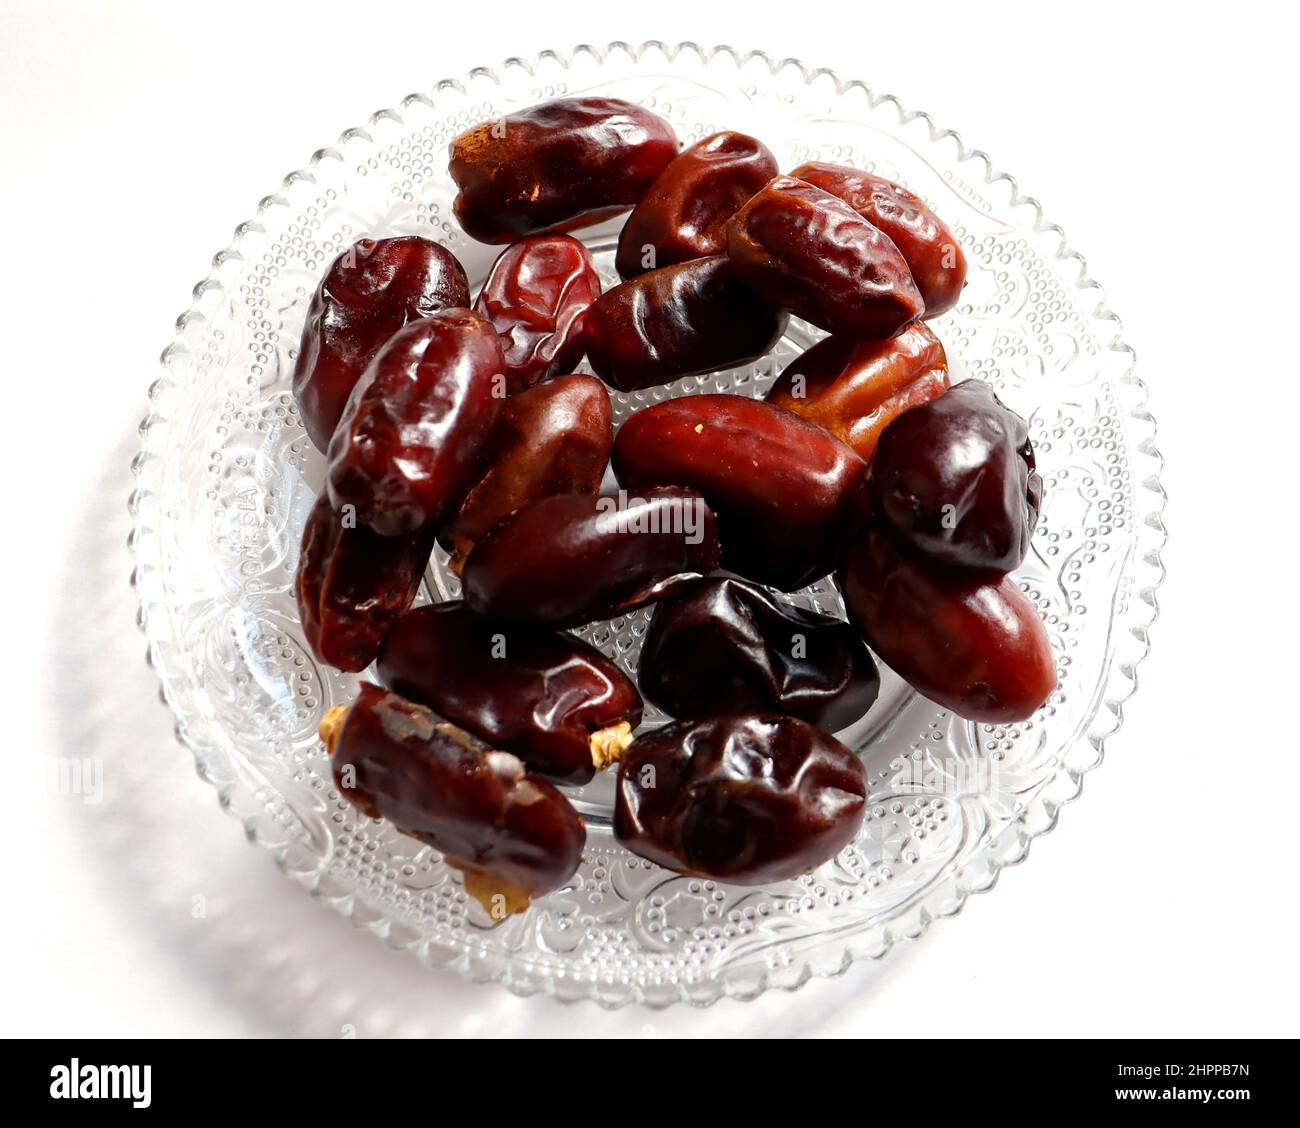 Dates on a glass plate with white background,high antioxidants and high fiber,eat as a snack Stock Photo